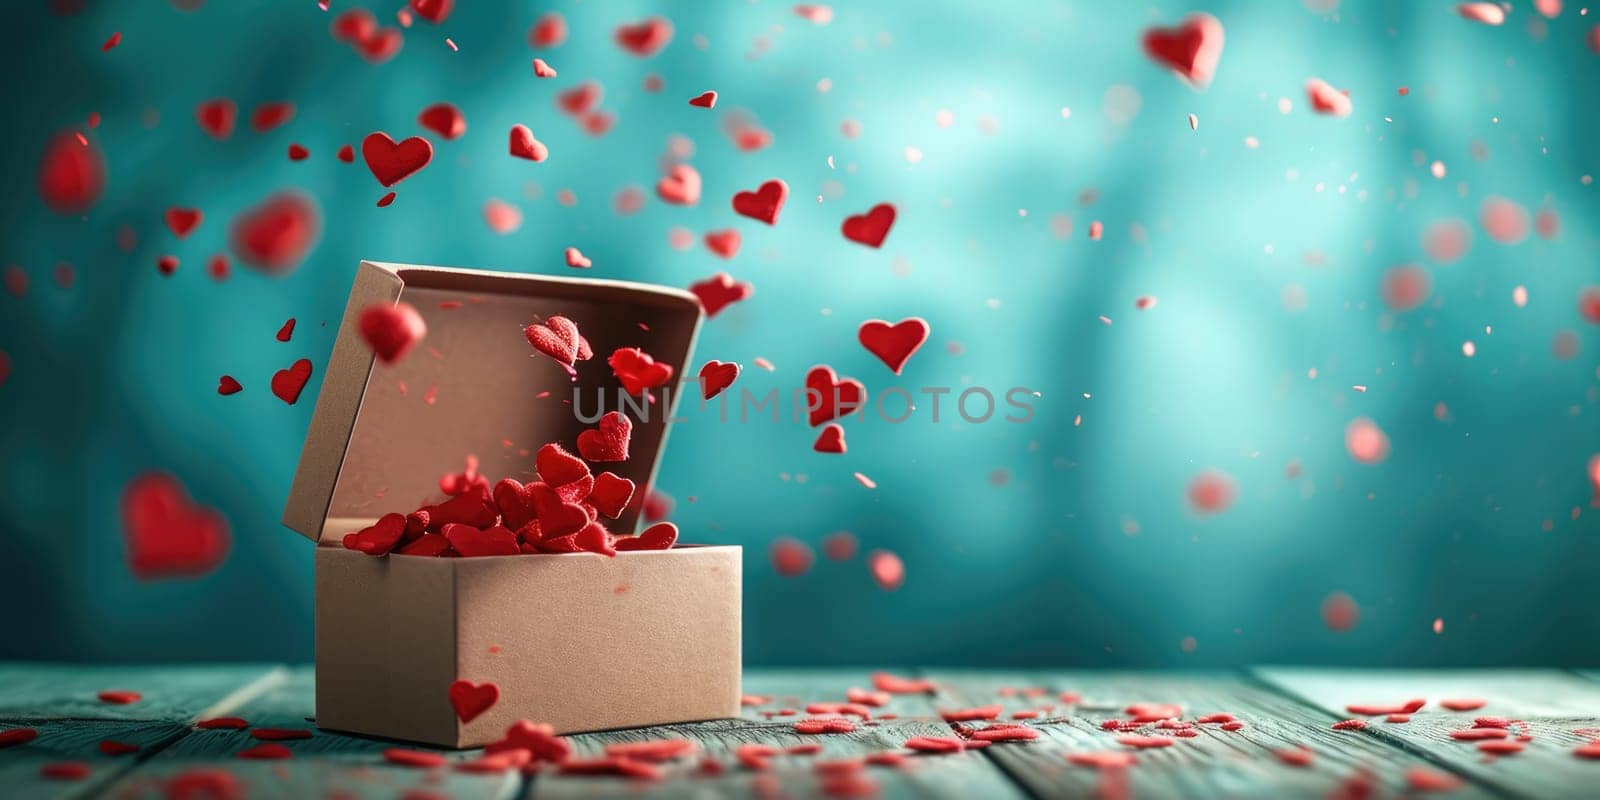 a gift box of romantic love on valentines day pragma by biancoblue